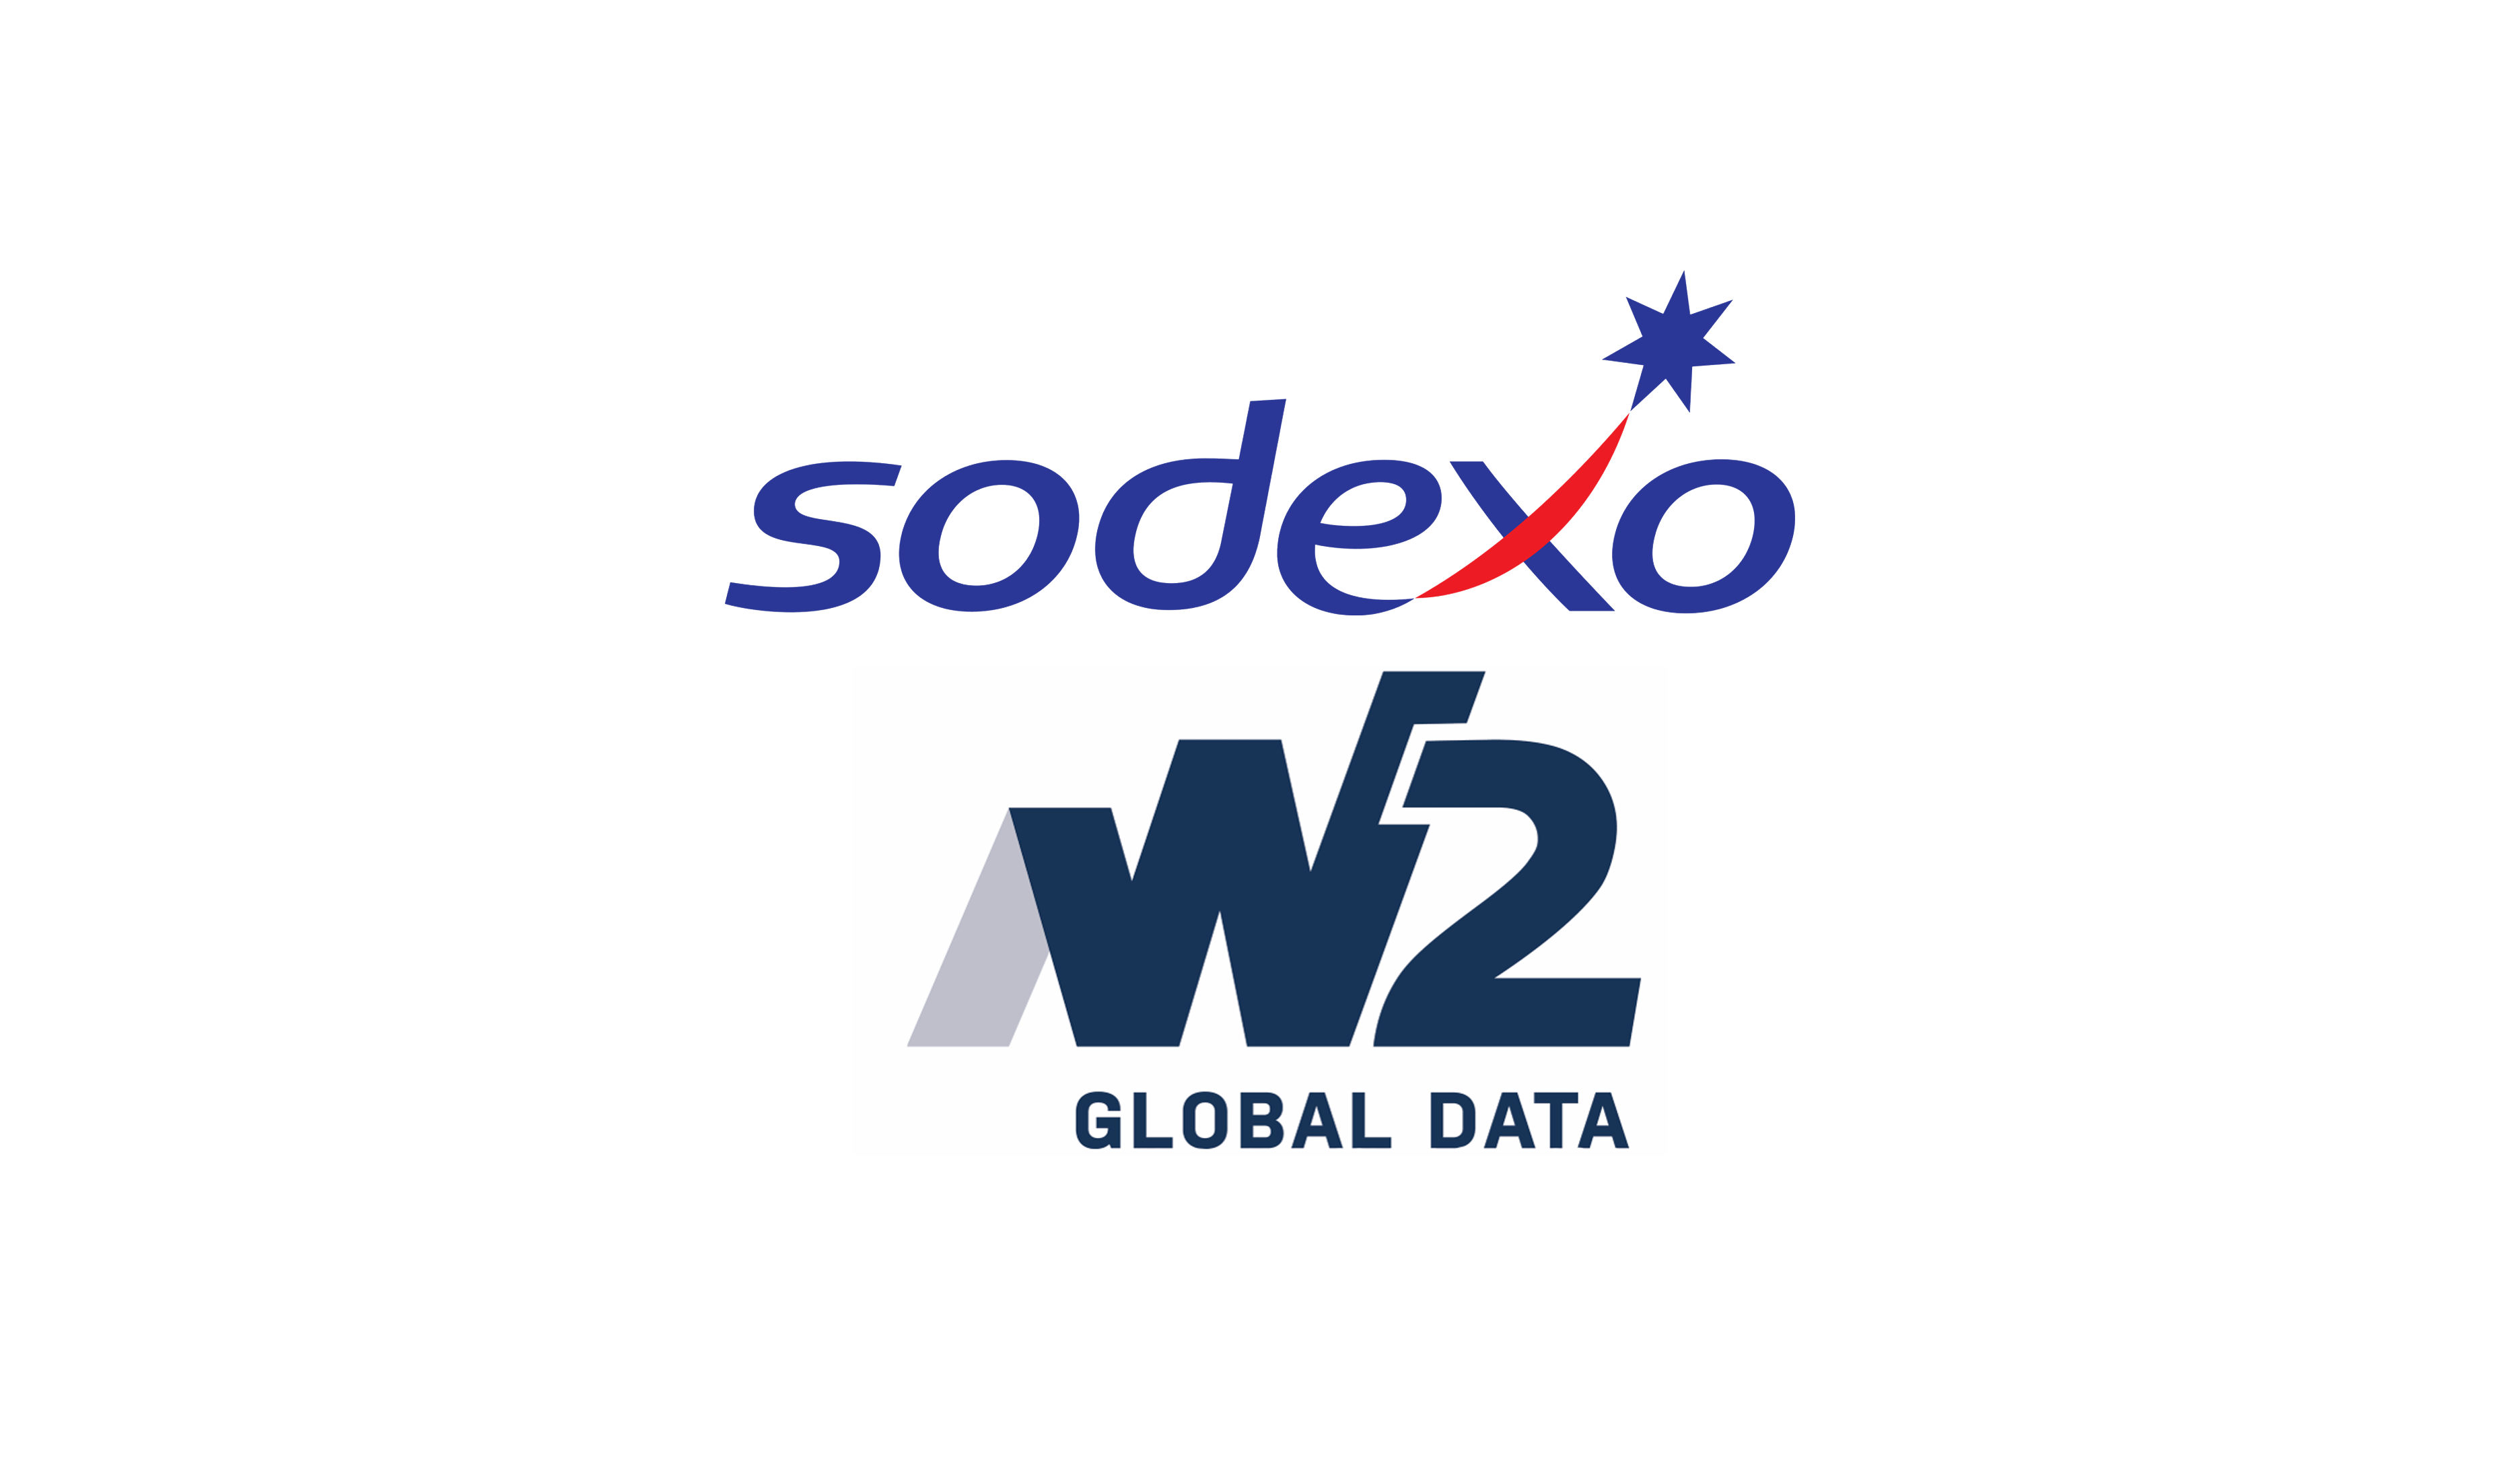 W2 Announces Partnership with Sodexo Engage to Boost Data Integrity for Onboarding